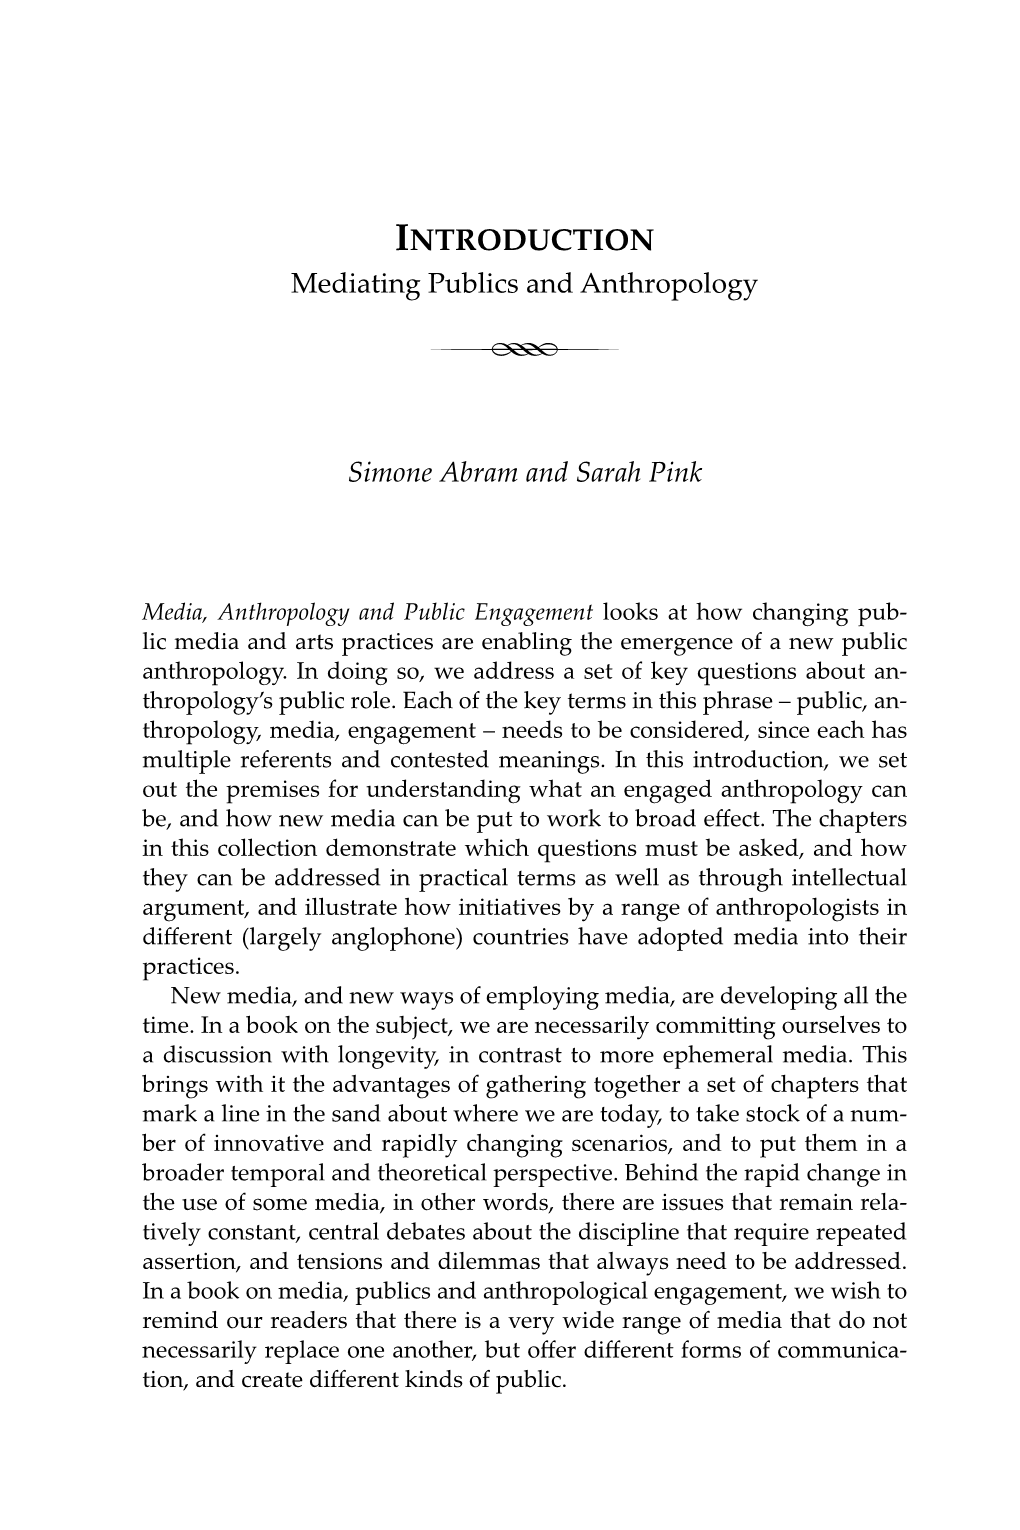 INTRODUCTION Mediating Publics and Anthropology R